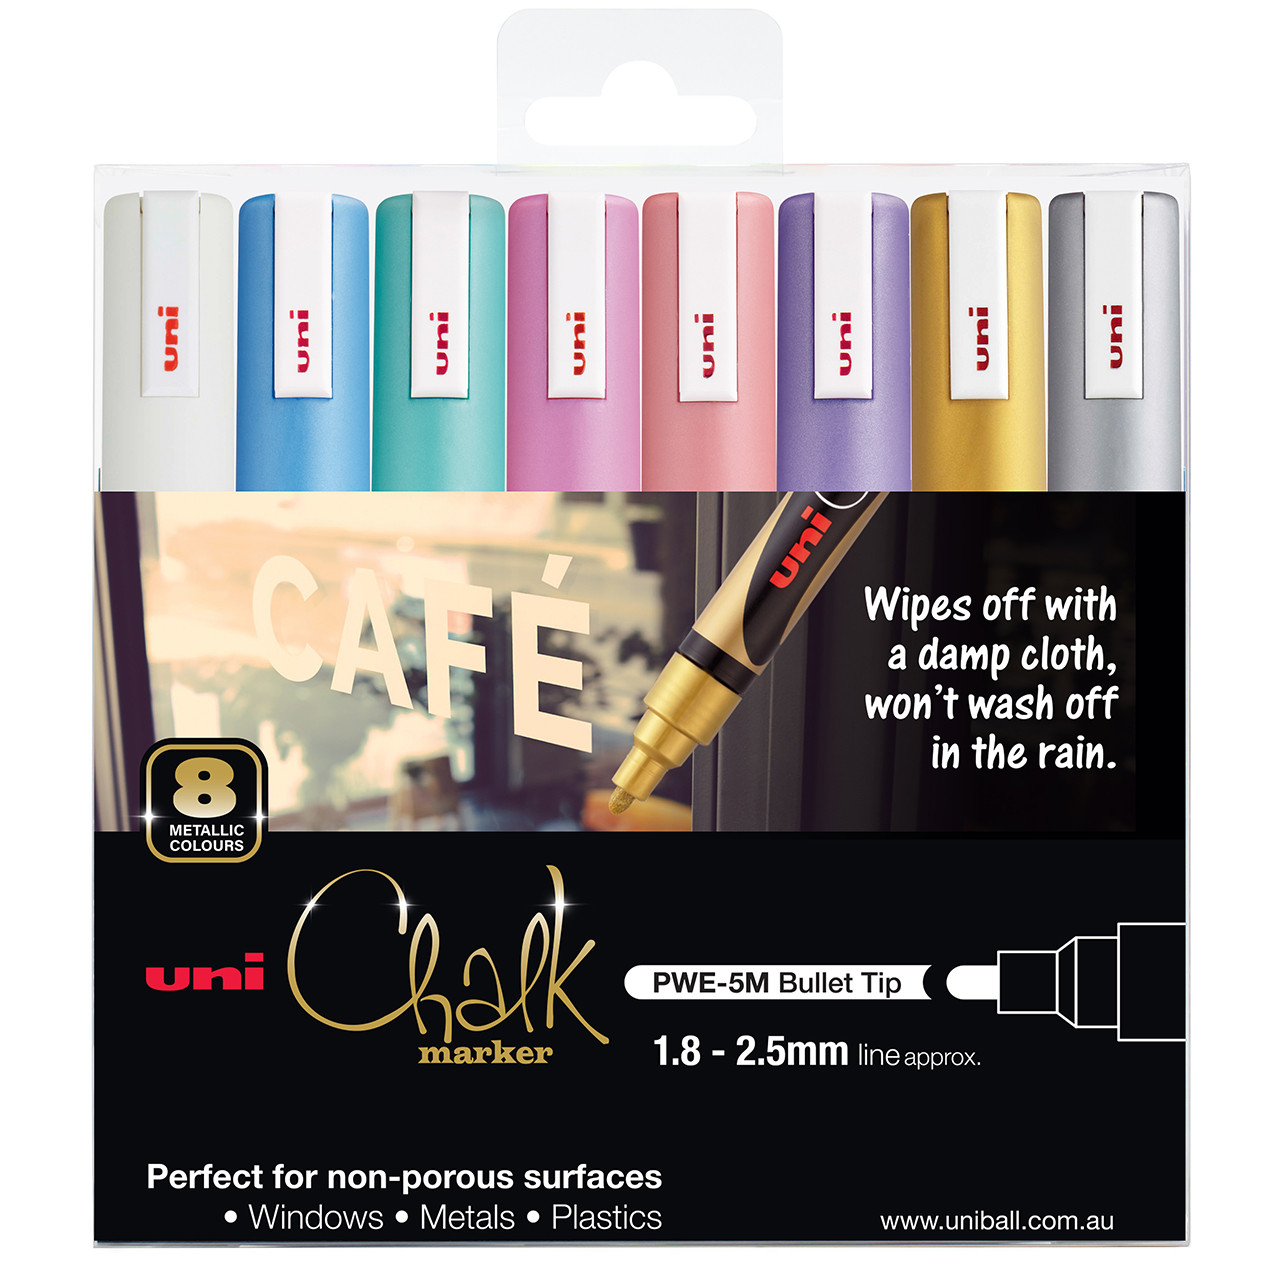 Decorate shop windows and mirrors easily with the Uni Chalk marker